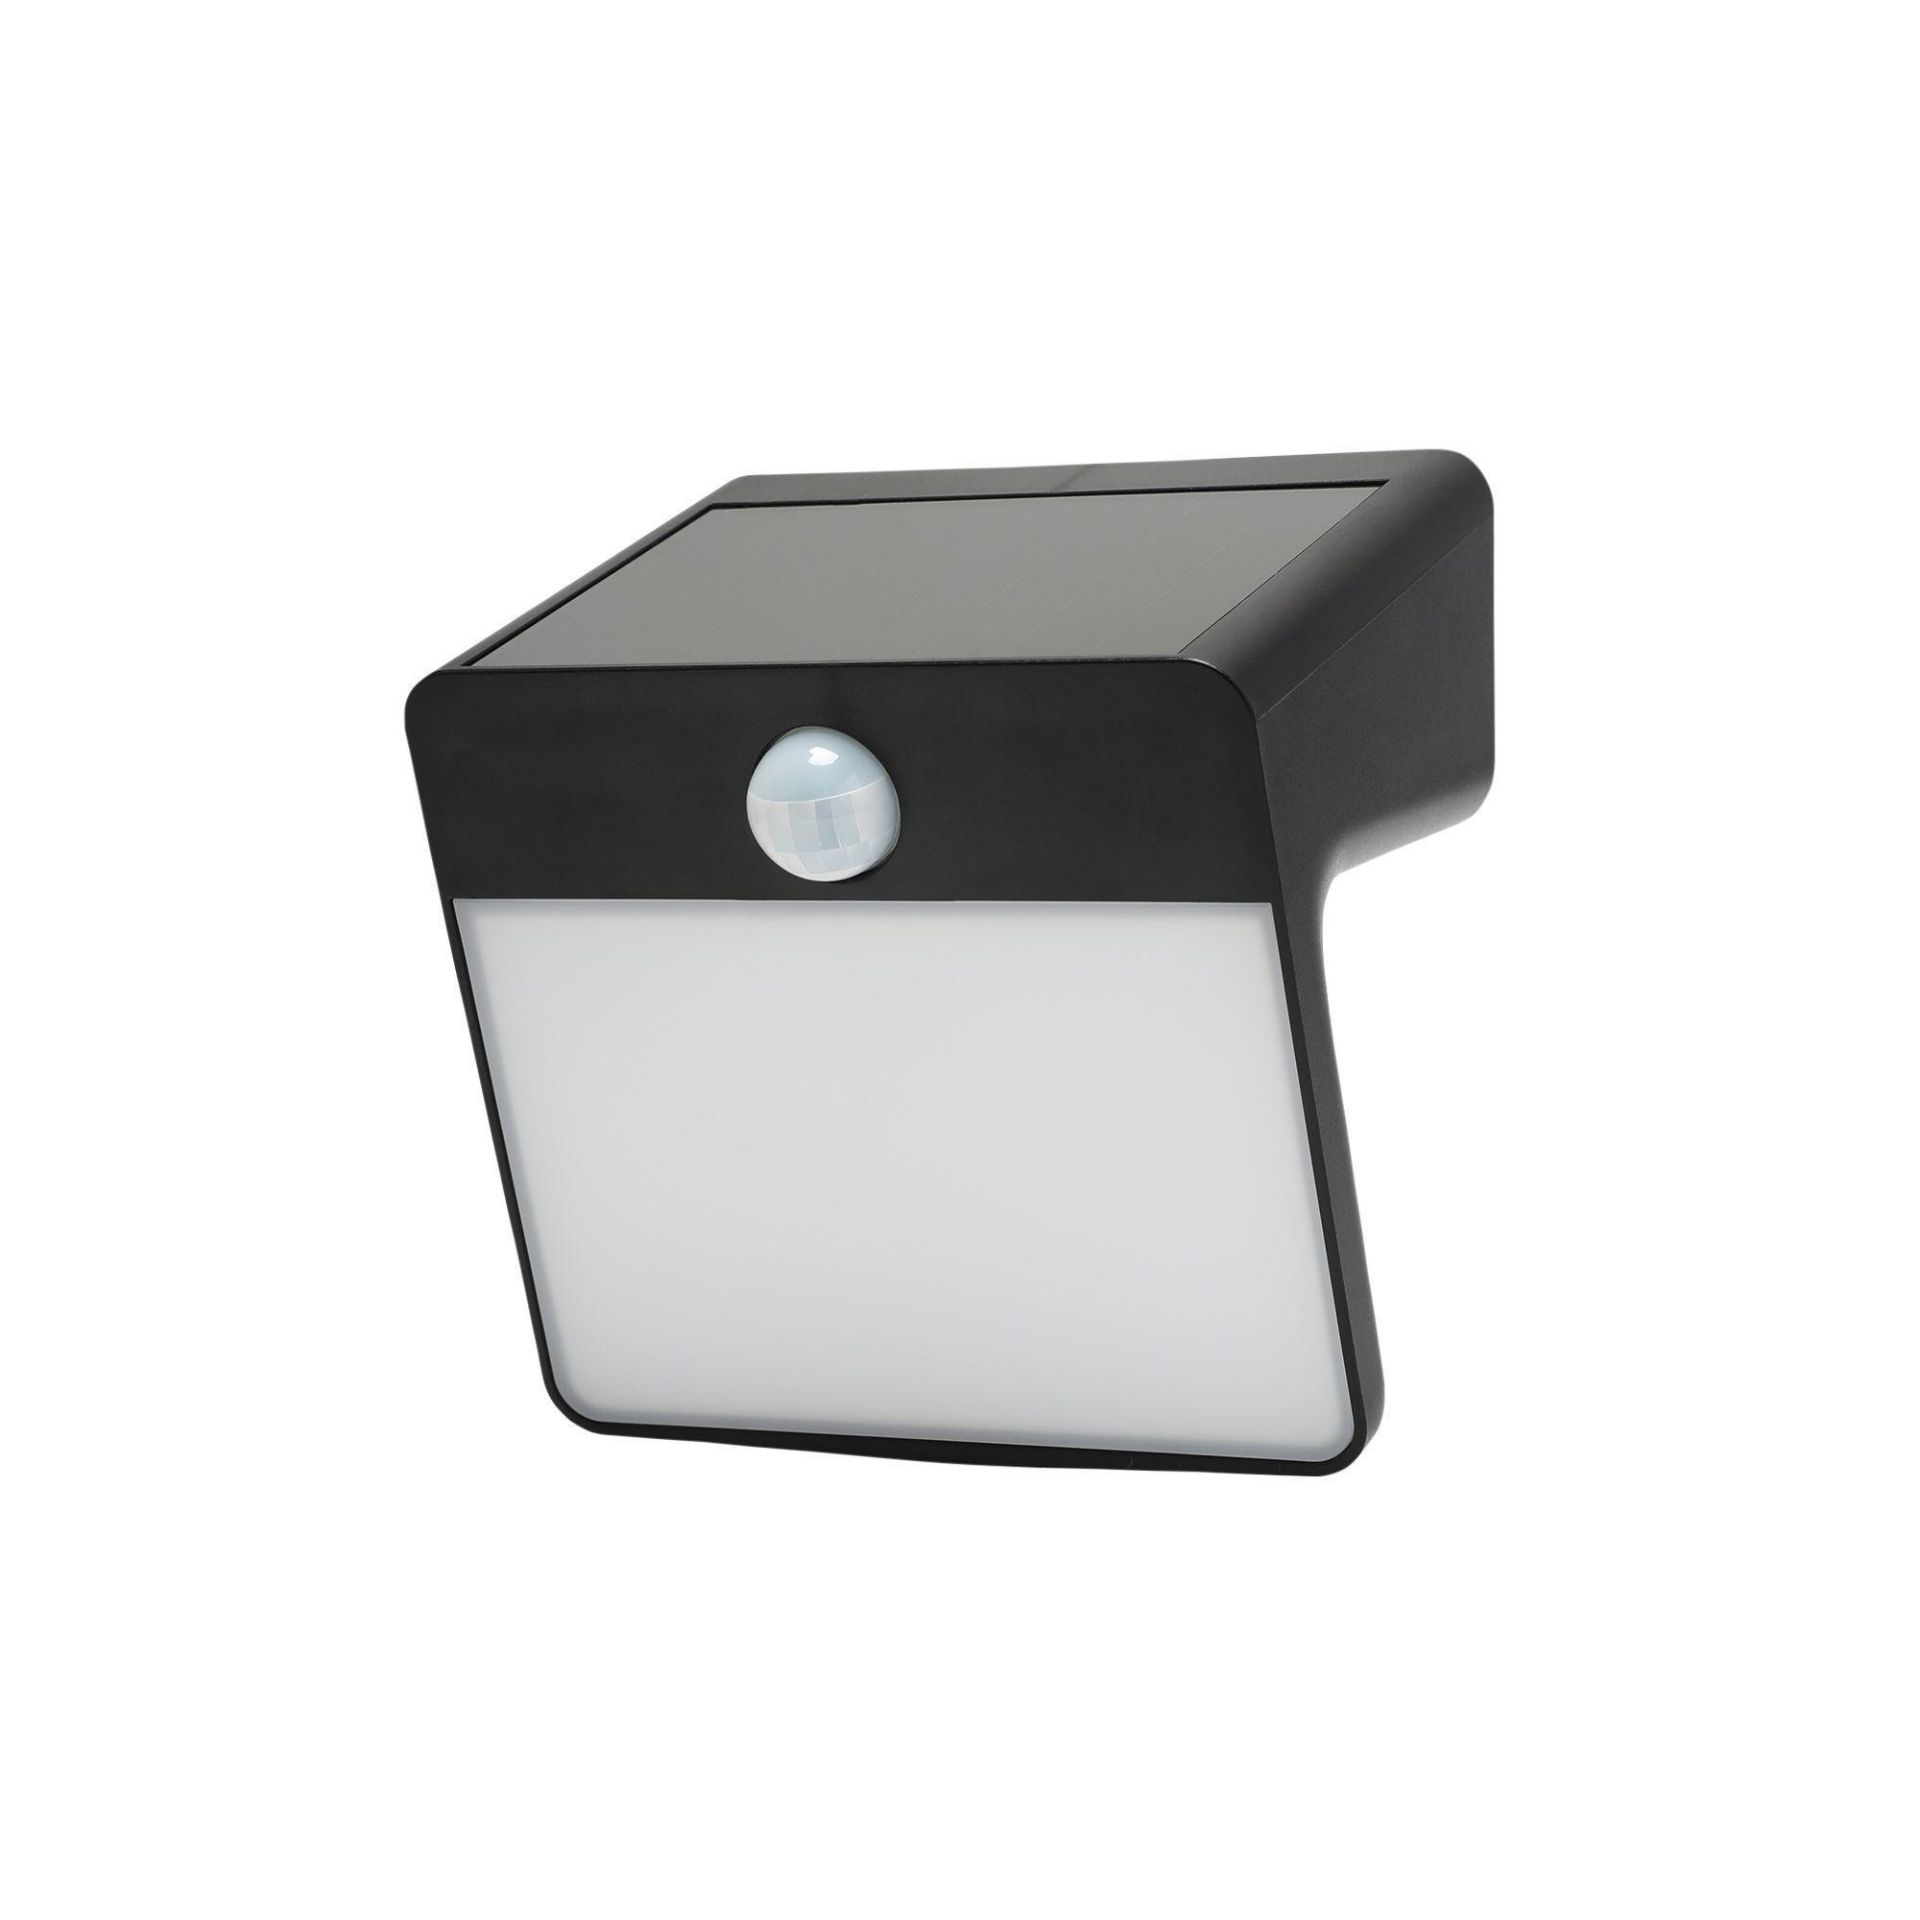 GoodHome Black Solar-Powered Cold White Integrated LED Floodlight 150Lm - SR48. This solar